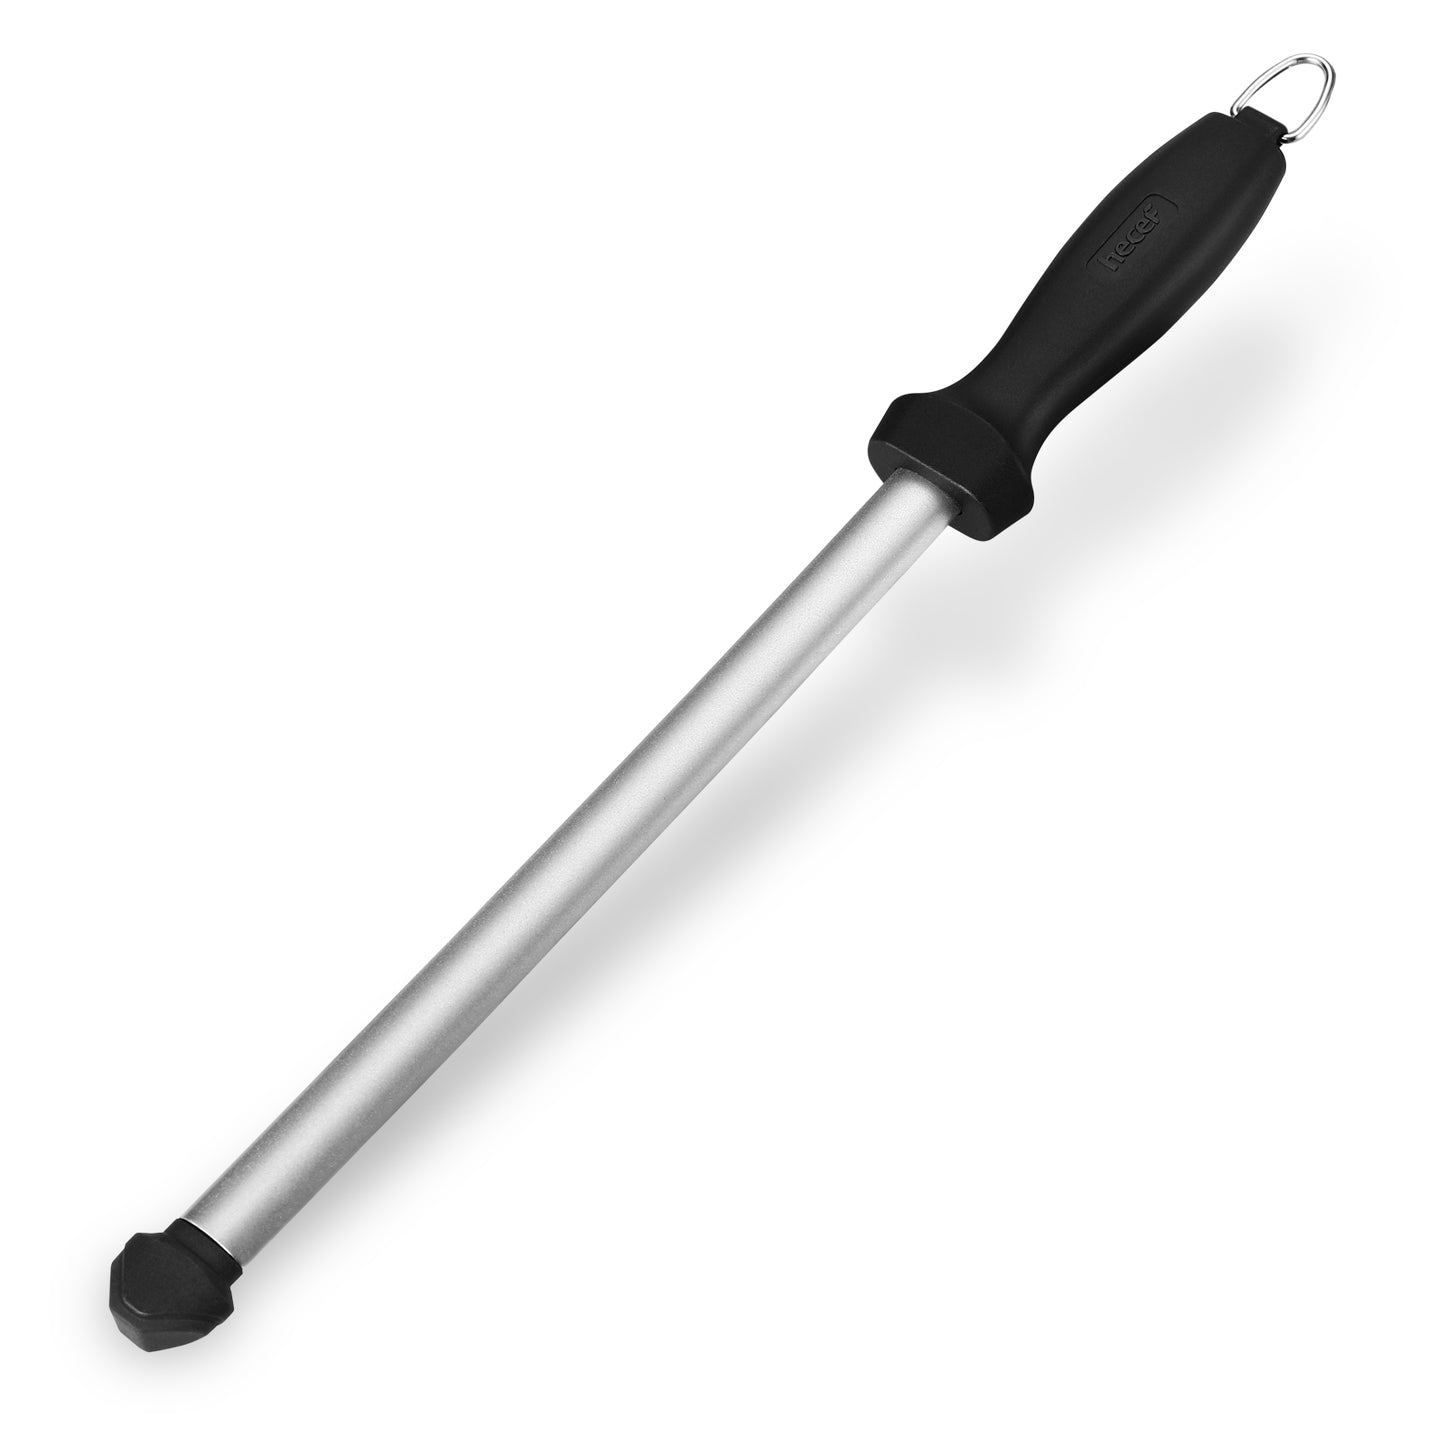 Professional Knife Steel Magnetized for Safety. Our Honing Rod Has An Oval Handle for A Firm Grip and Is Built for Daily Use, Perfect for Chefs and HO